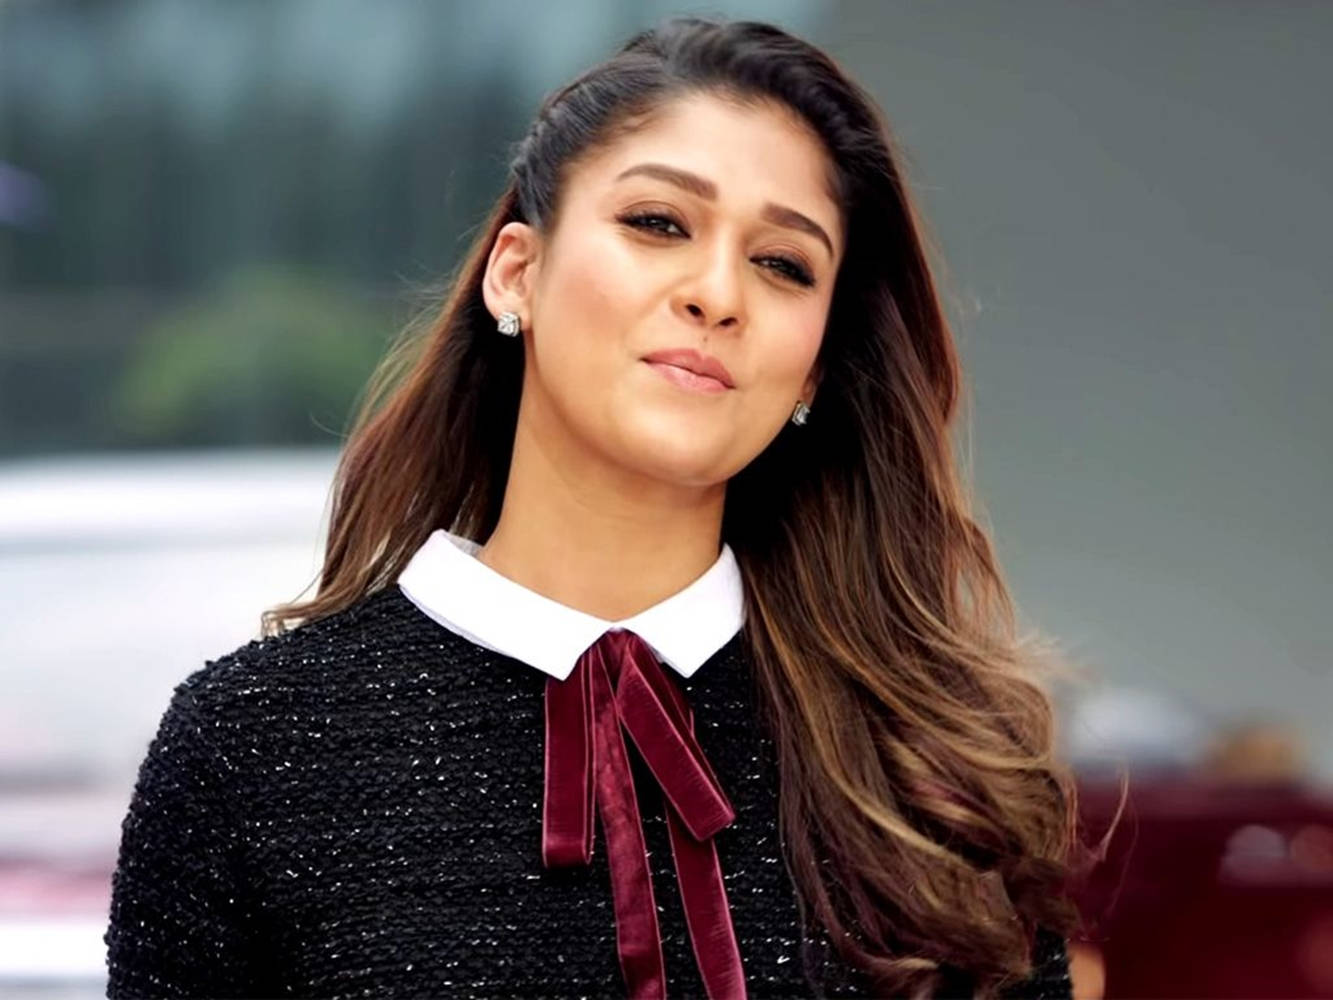 Captivating Nayanthara in a Stylish Black Ensemble with a Red Tie Wallpaper